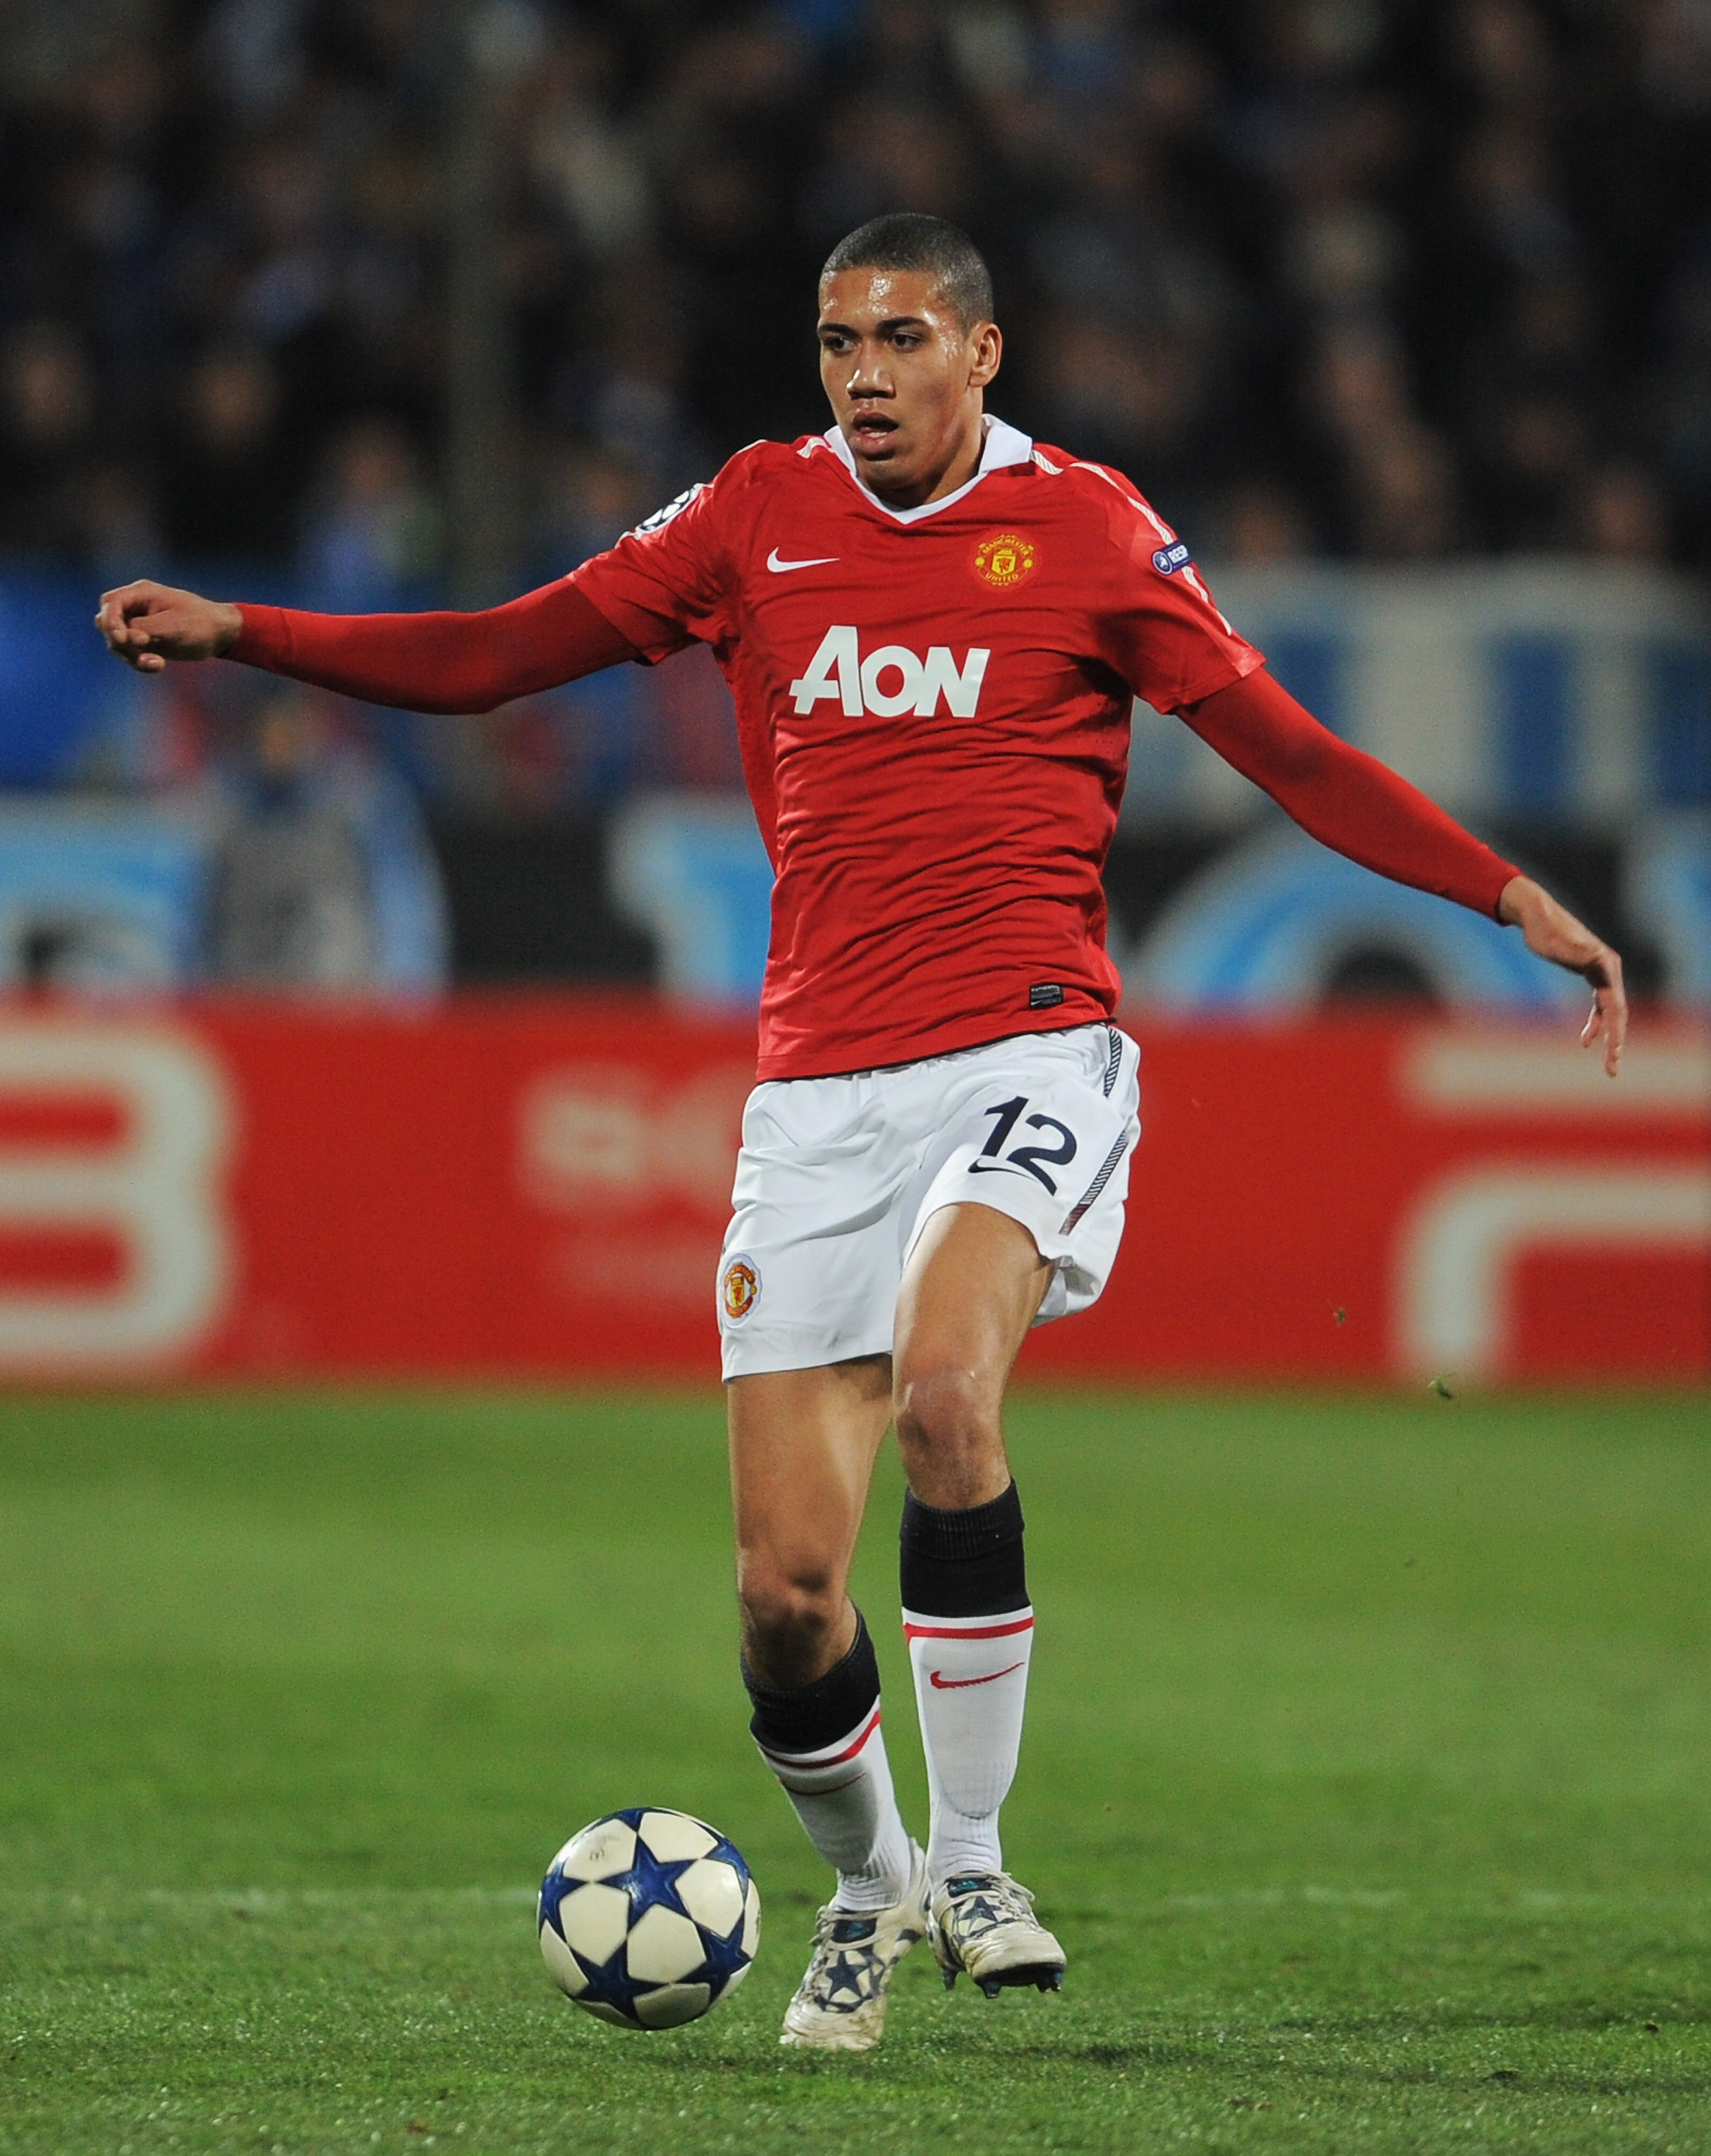 MARSEILLE, FRANCE - FEBRUARY 23: Chris Smalling of Manchester United in action during the UEFA Champions League round of 16 first leg match between Marseille and Manchester United at the Stade Velodrome on February 23, 2011 in Marseille, France.  (Photo b